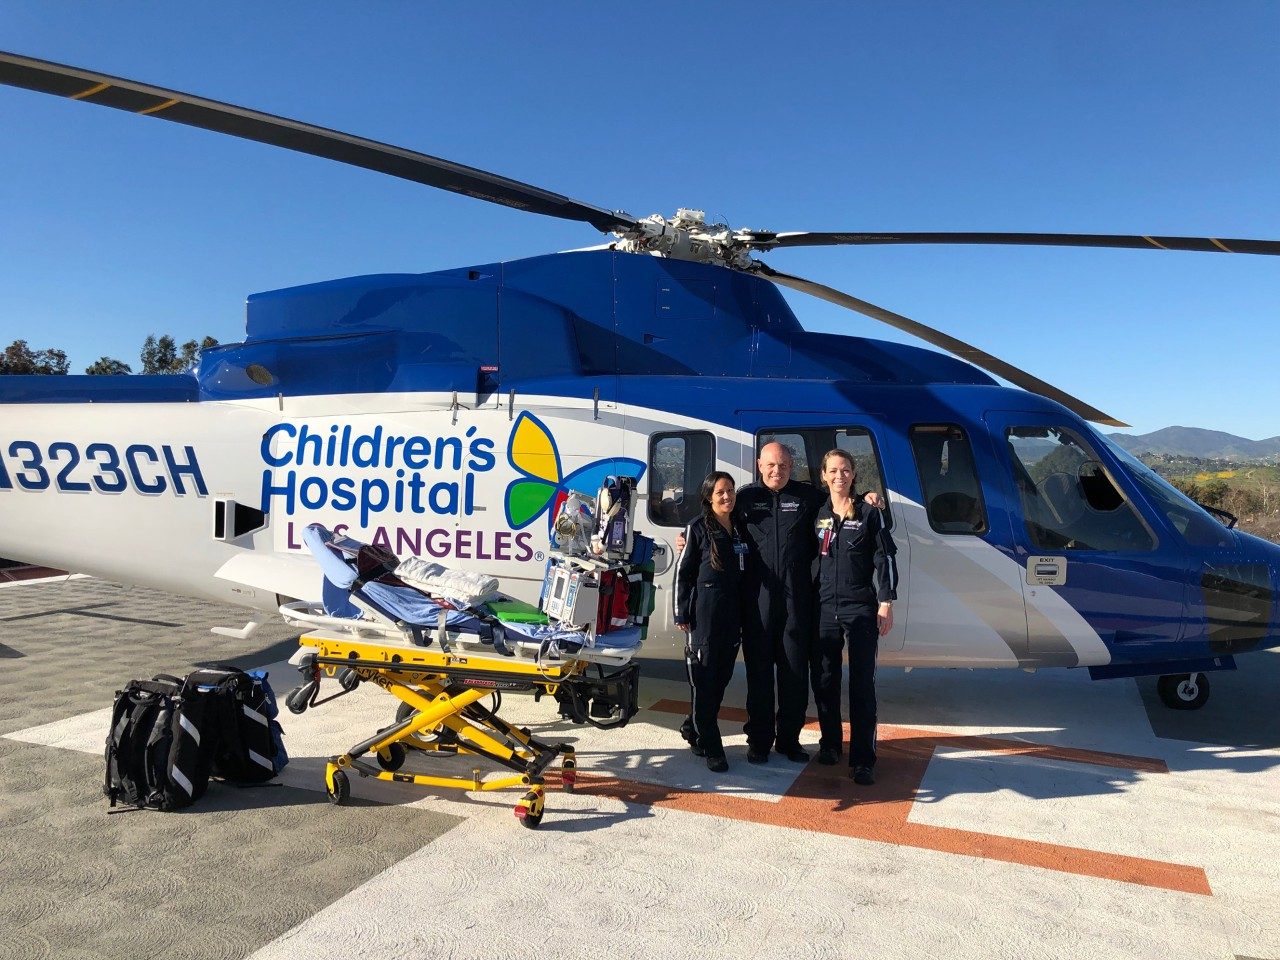 The pilot and medical crew pose for a photo in front of the CHLA helicopter. The S-76’s large size allows plenty of room for a parent, medical crew, and even a full-sized gurney. Photo provided.